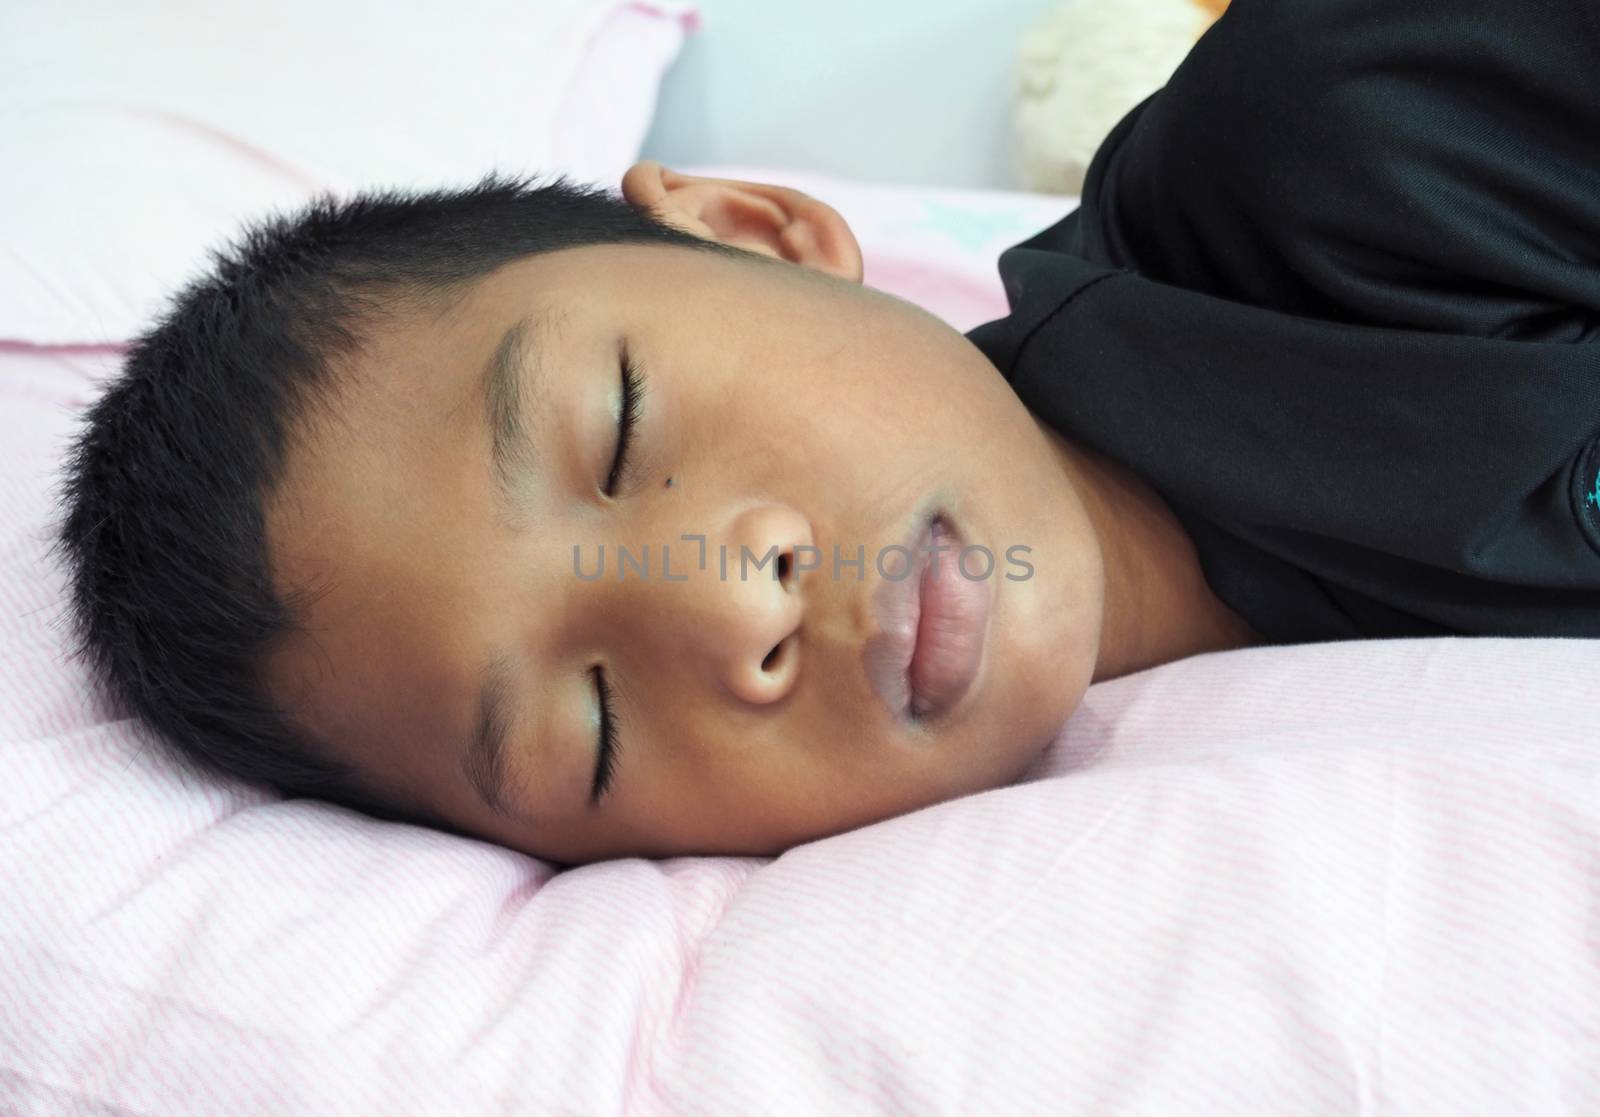 A close up of a boy sleeping on the bed